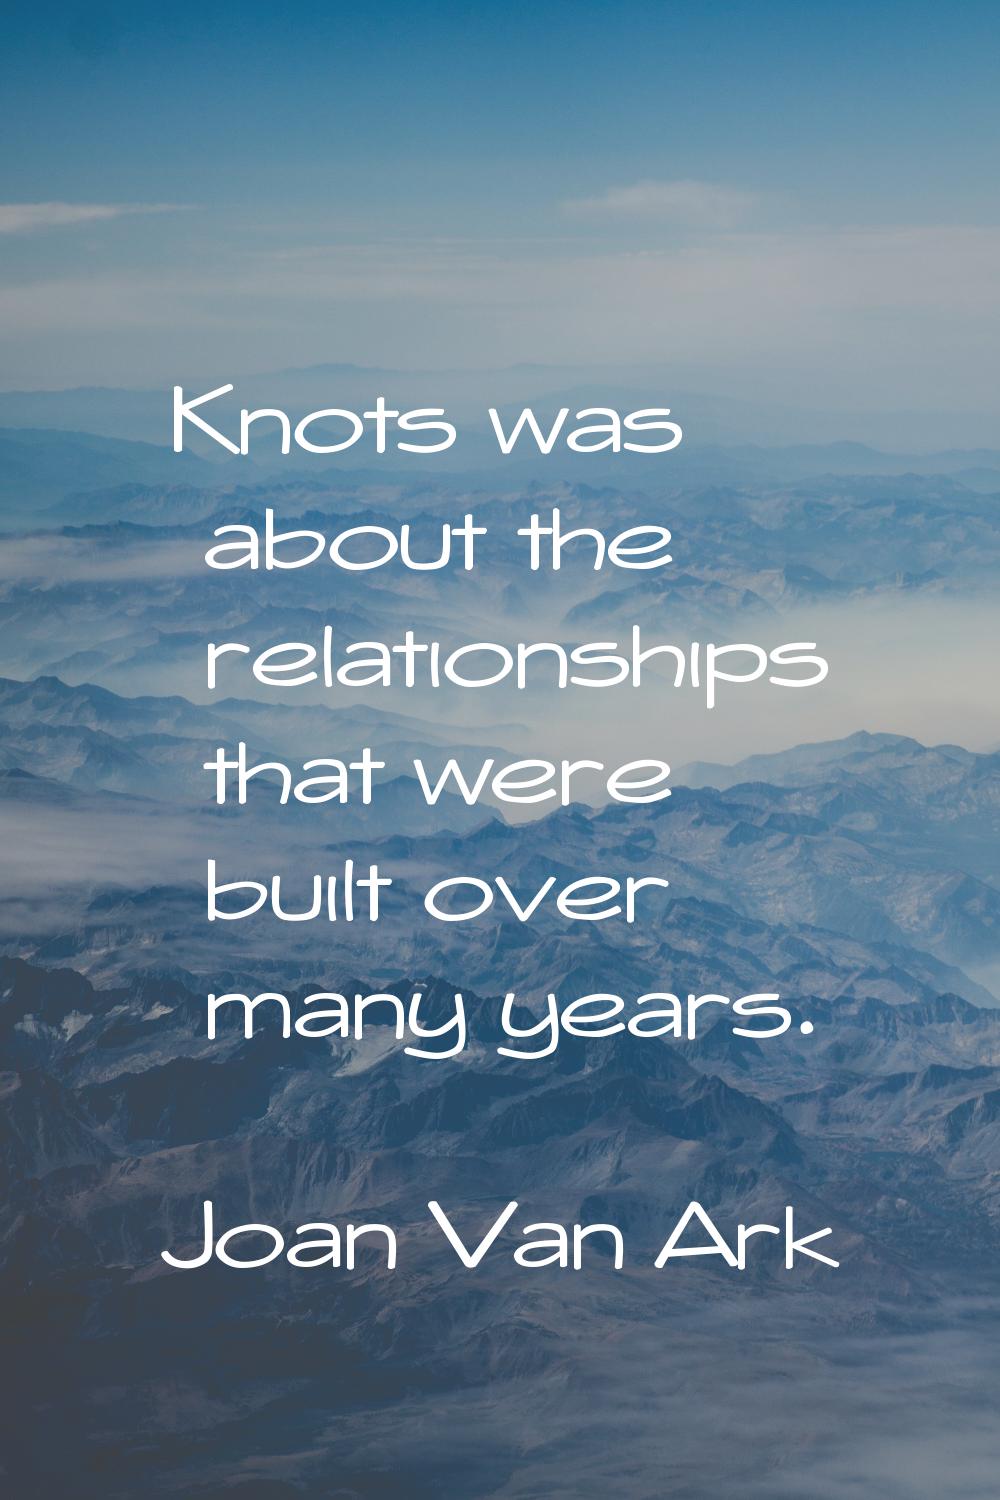 Knots was about the relationships that were built over many years.